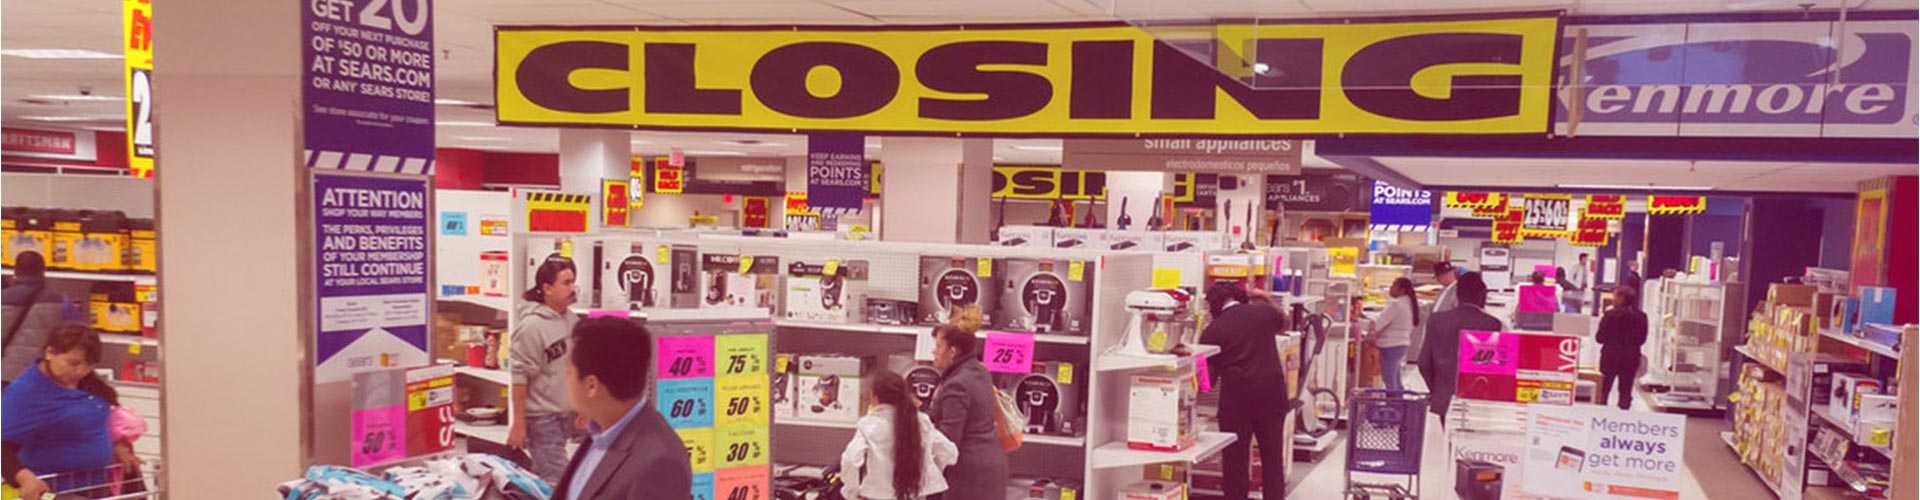 Blog banner featuring inside of a store with large closing banner hanging from ceiling